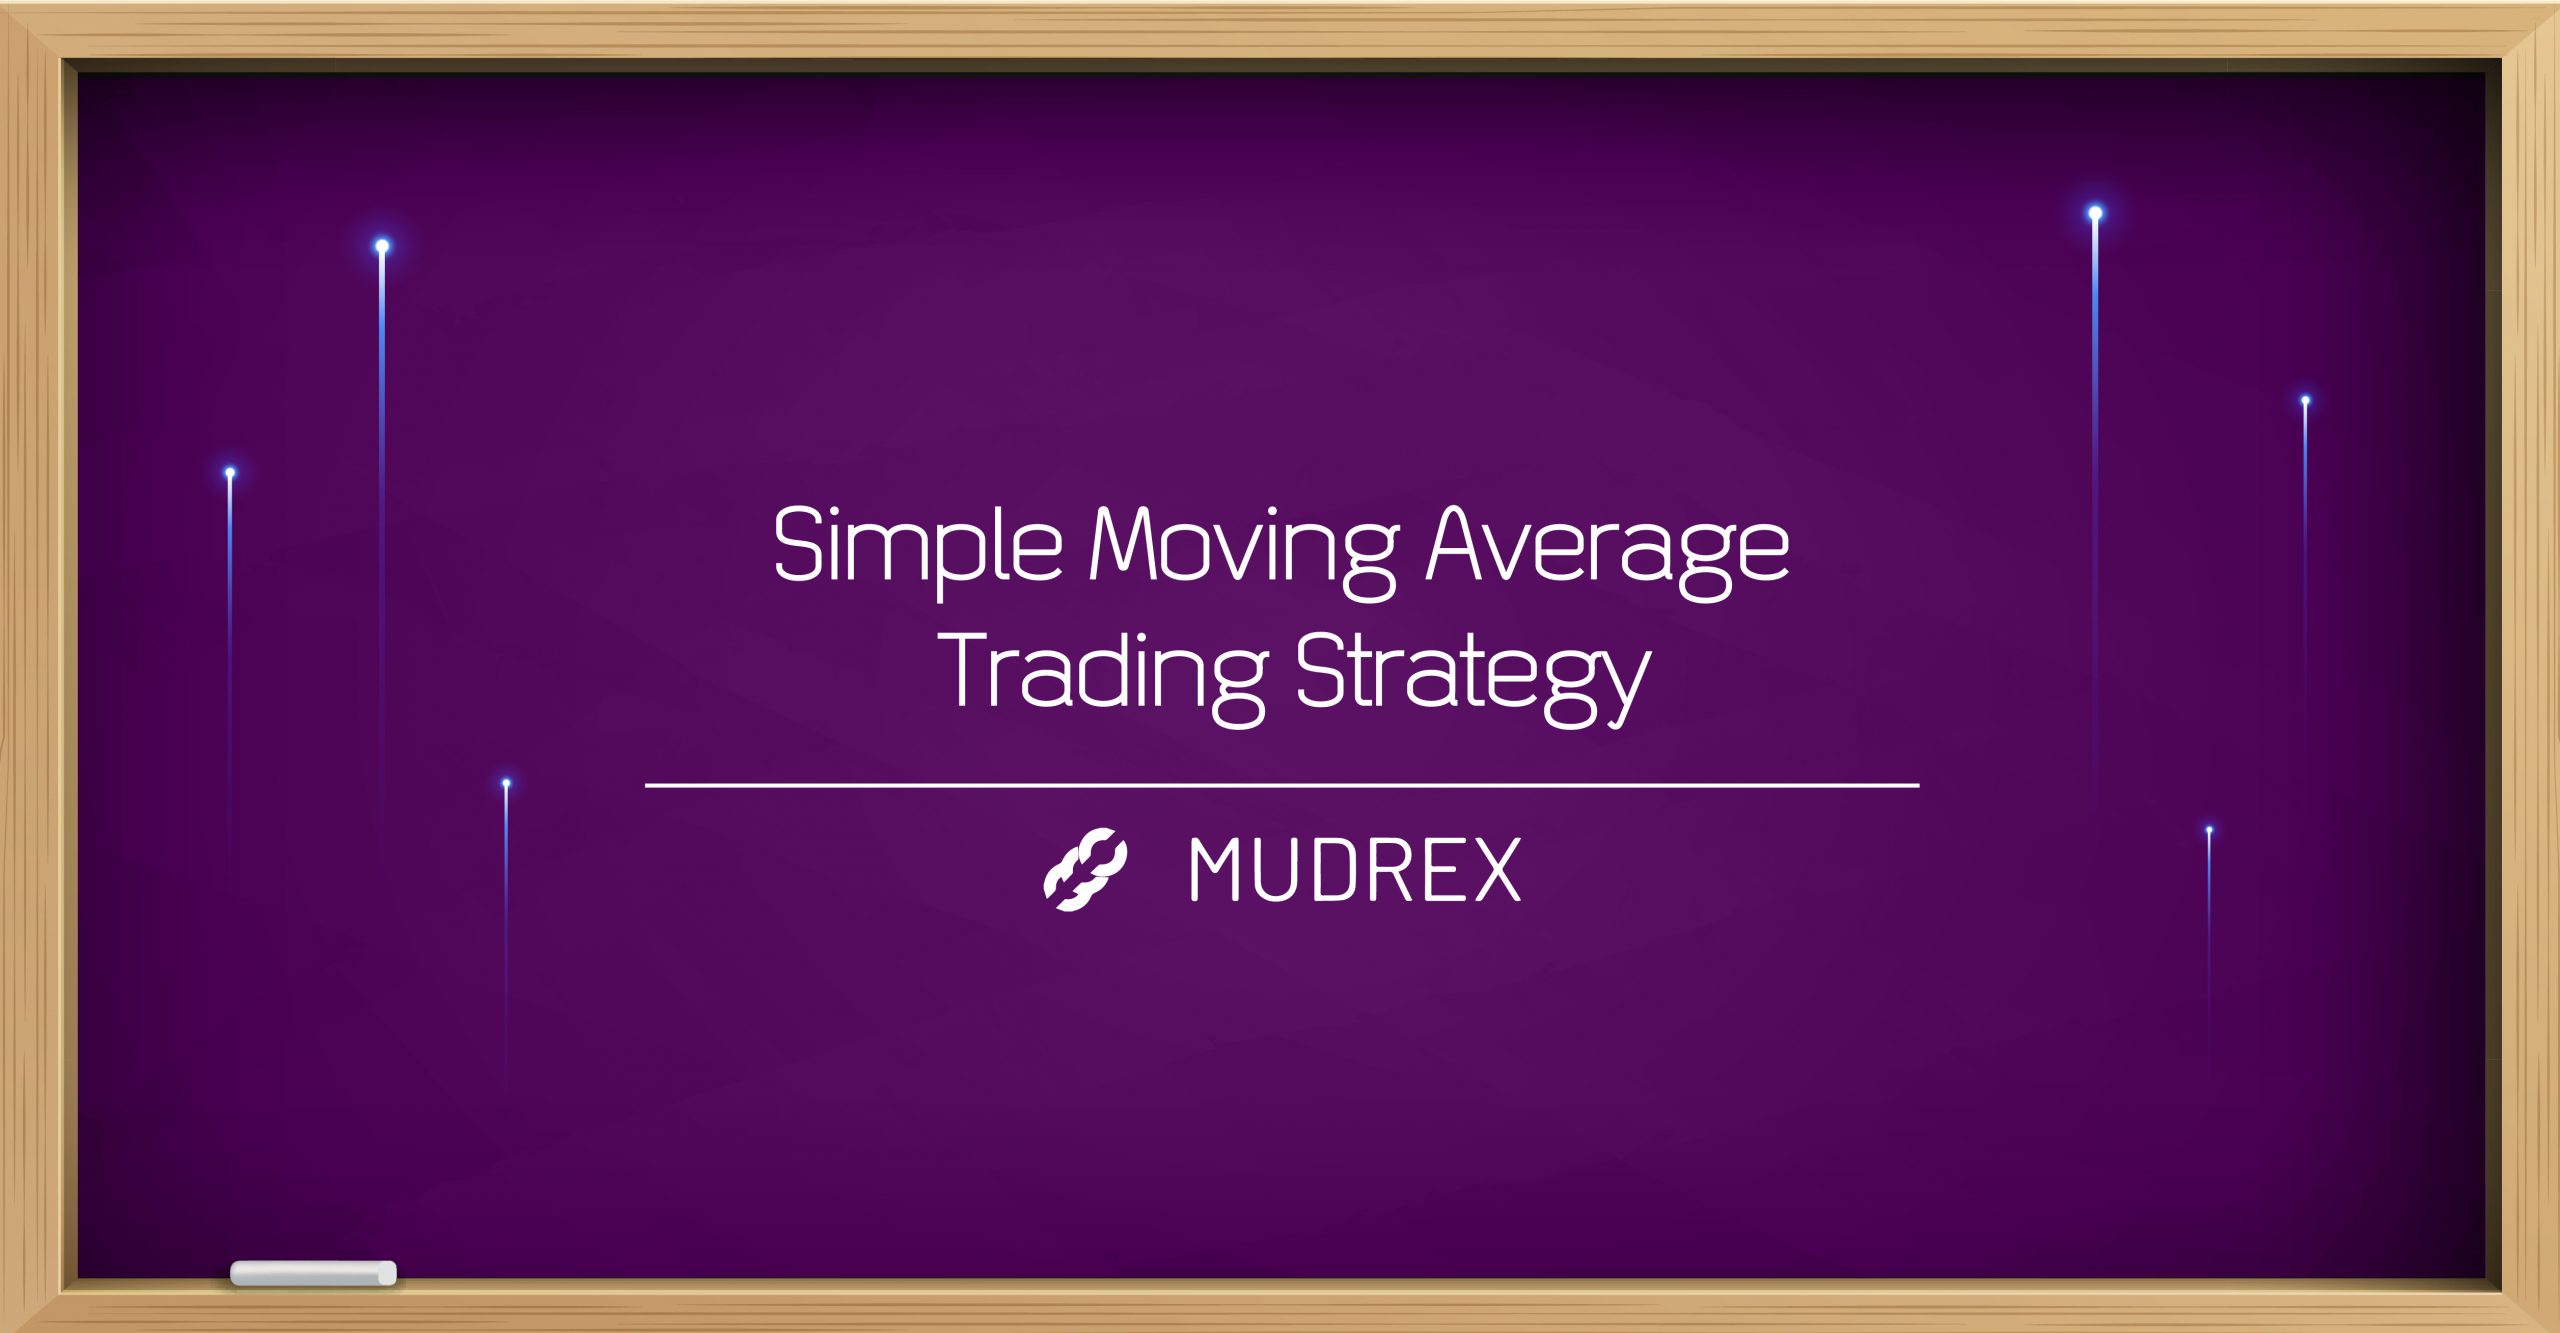 Simple Moving Average Trading Strategy